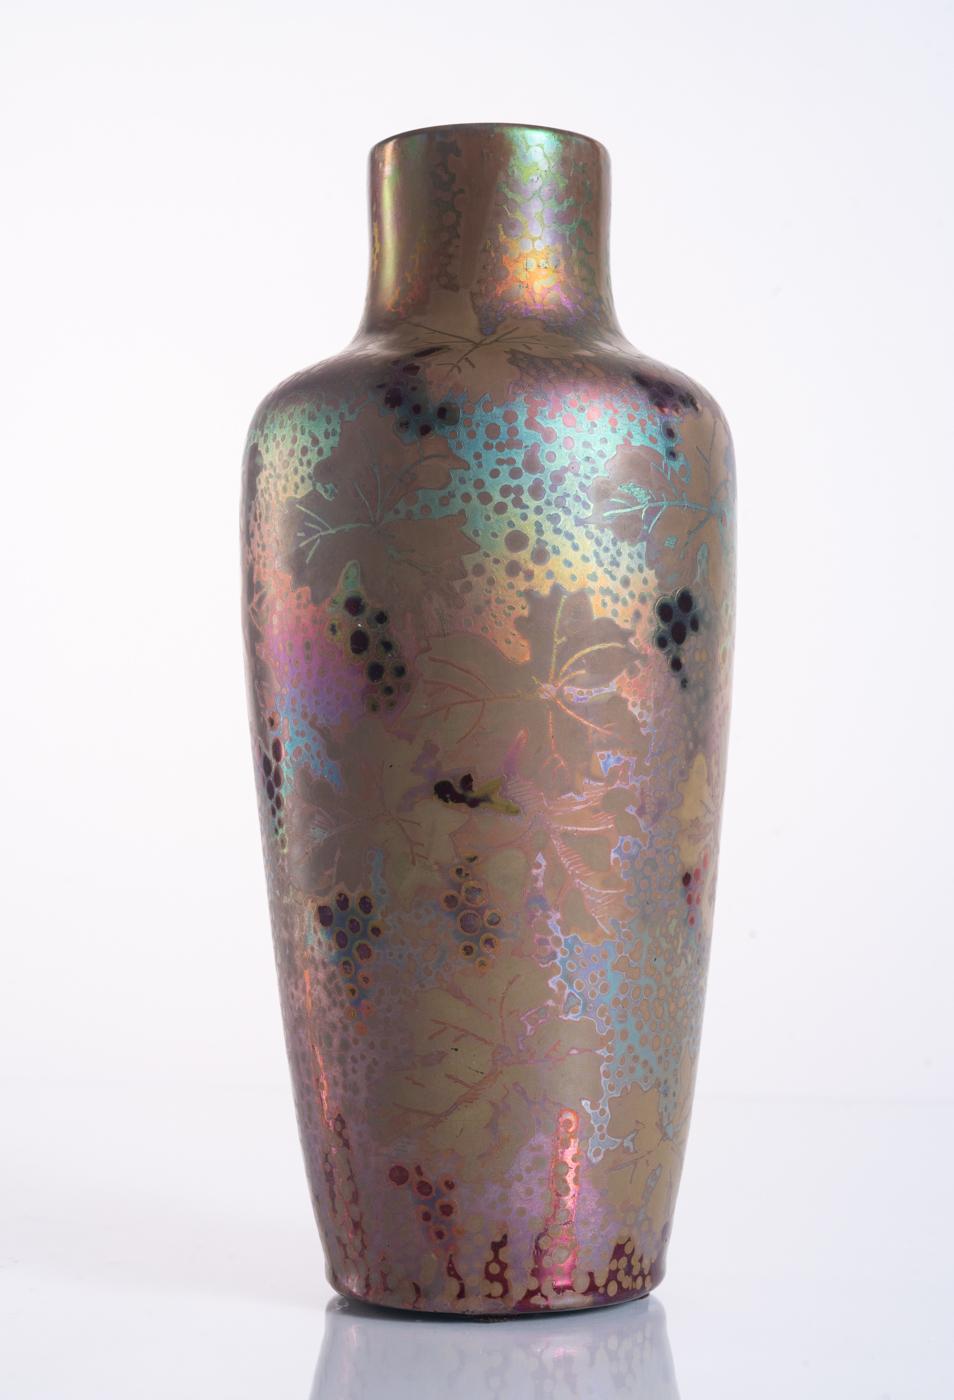 Ceramic vase in a blue and green metallic lustre glaze by master of iridescence Clement Massier, with clusters of grapes and leaves in deep purple. Signed MCM in the base, and numbered. 

Clément Massier was a renowned French ceramicist known for